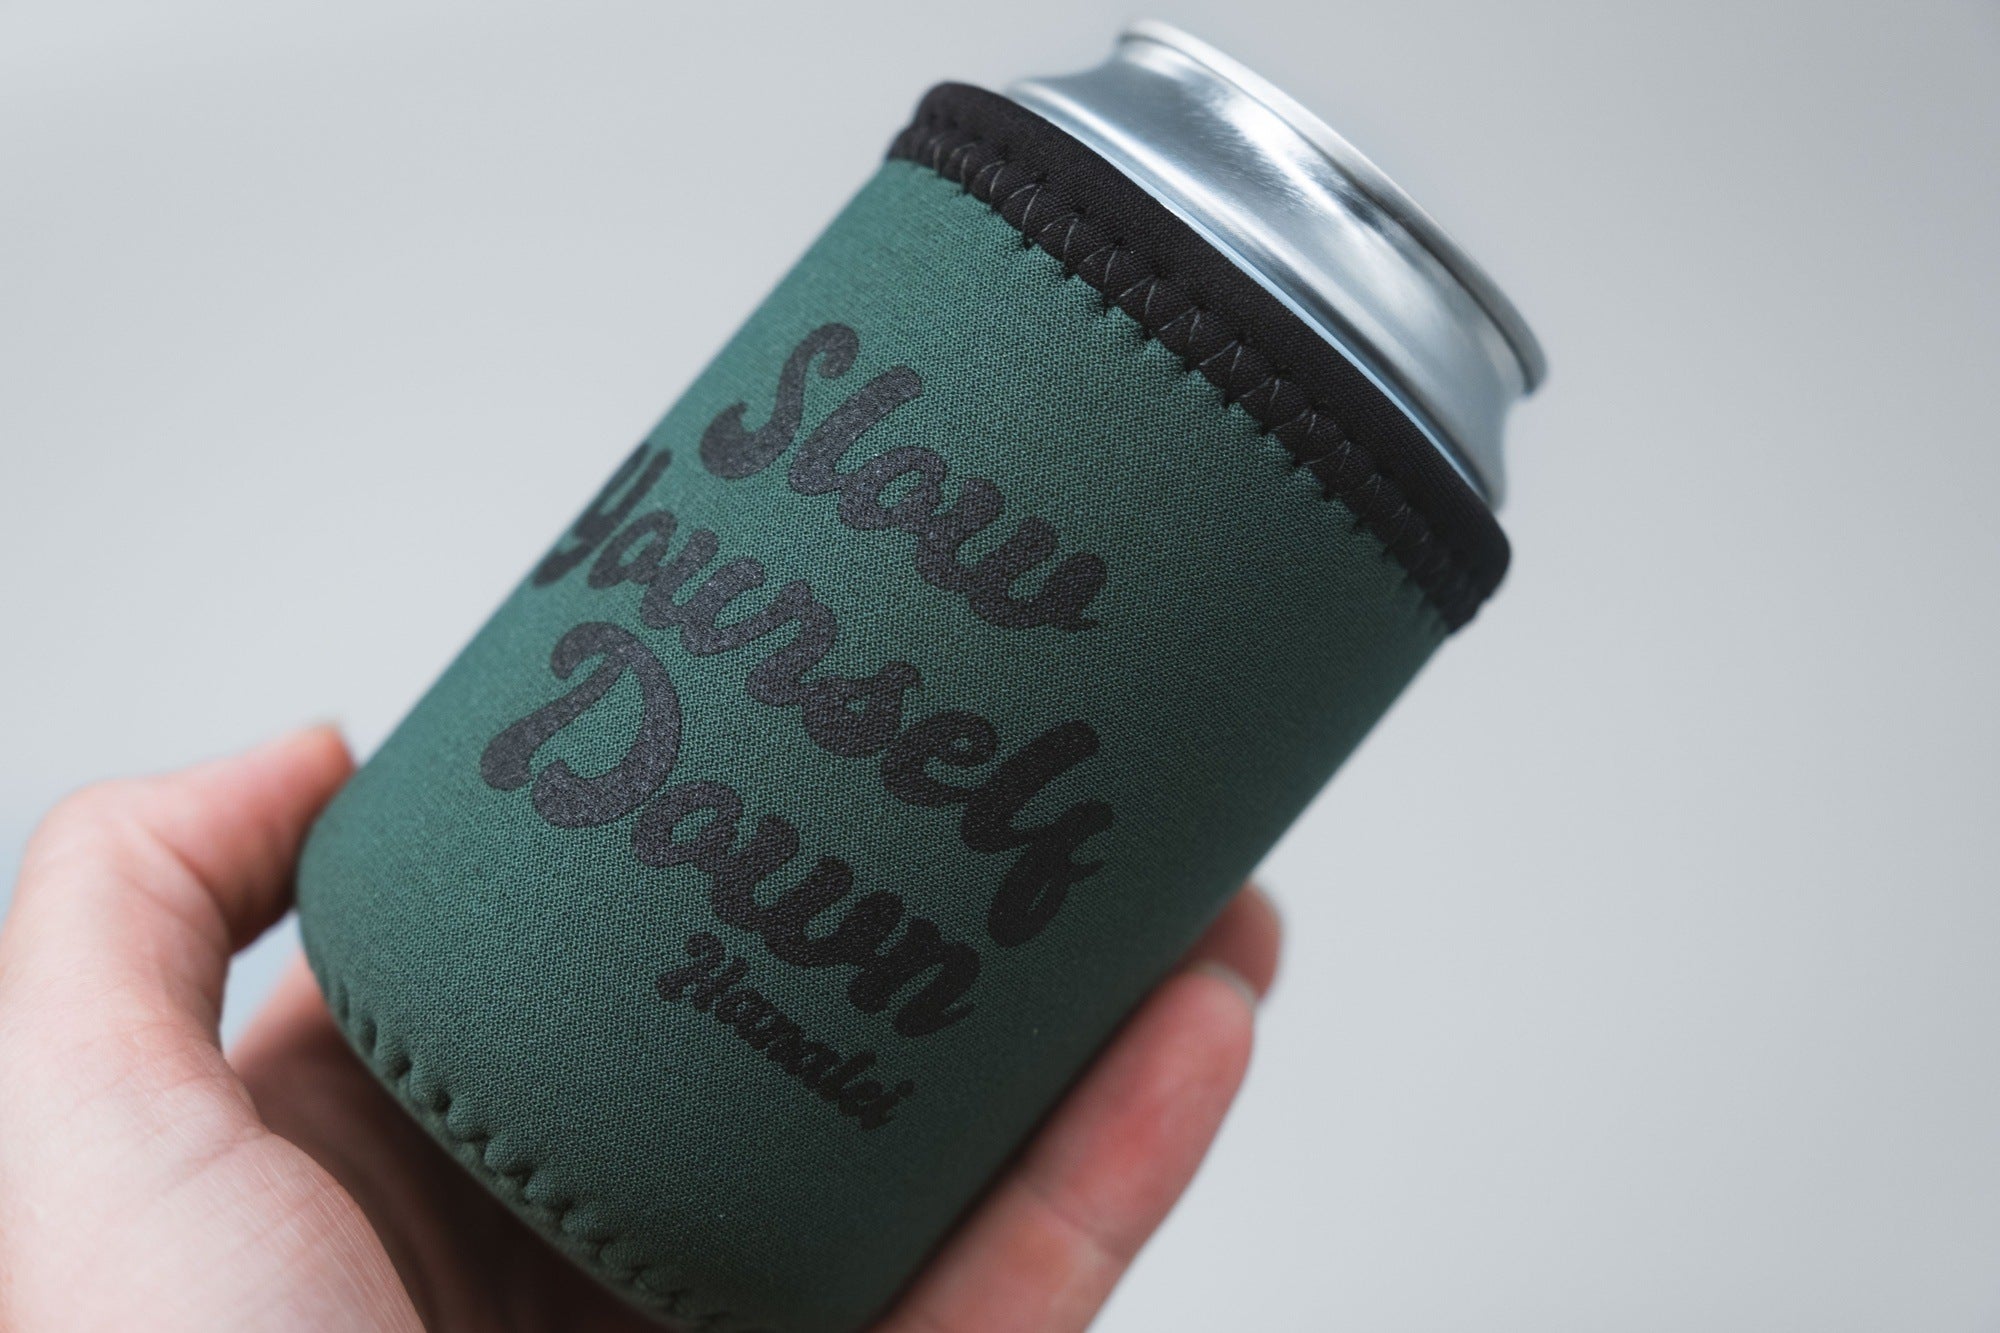 Retro Coozie Coozie - Slow Yourself Down